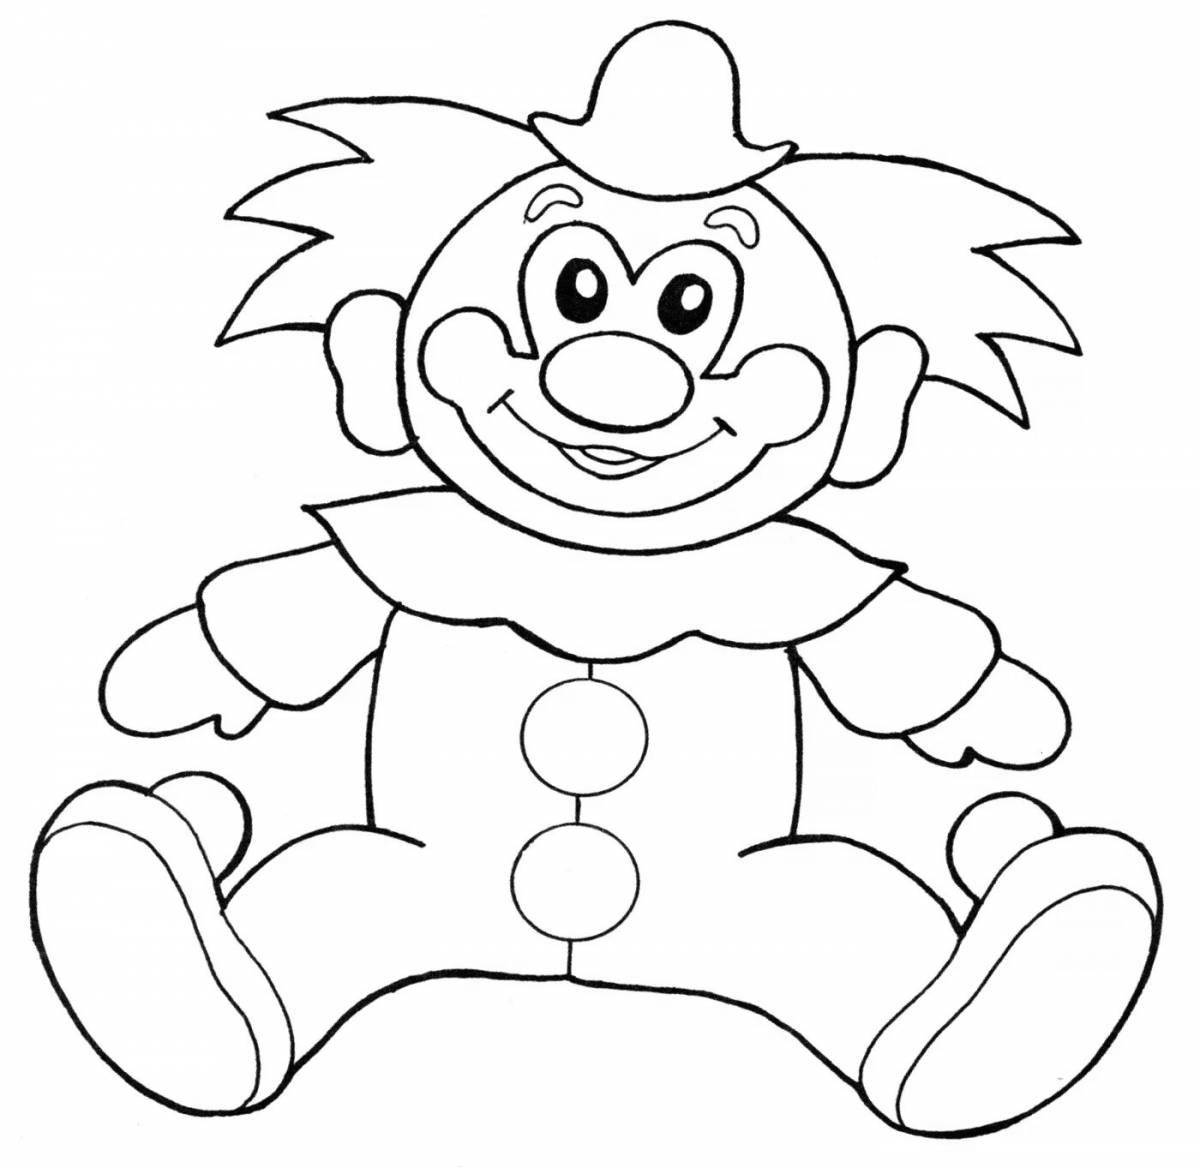 Cute clown drawing for kids